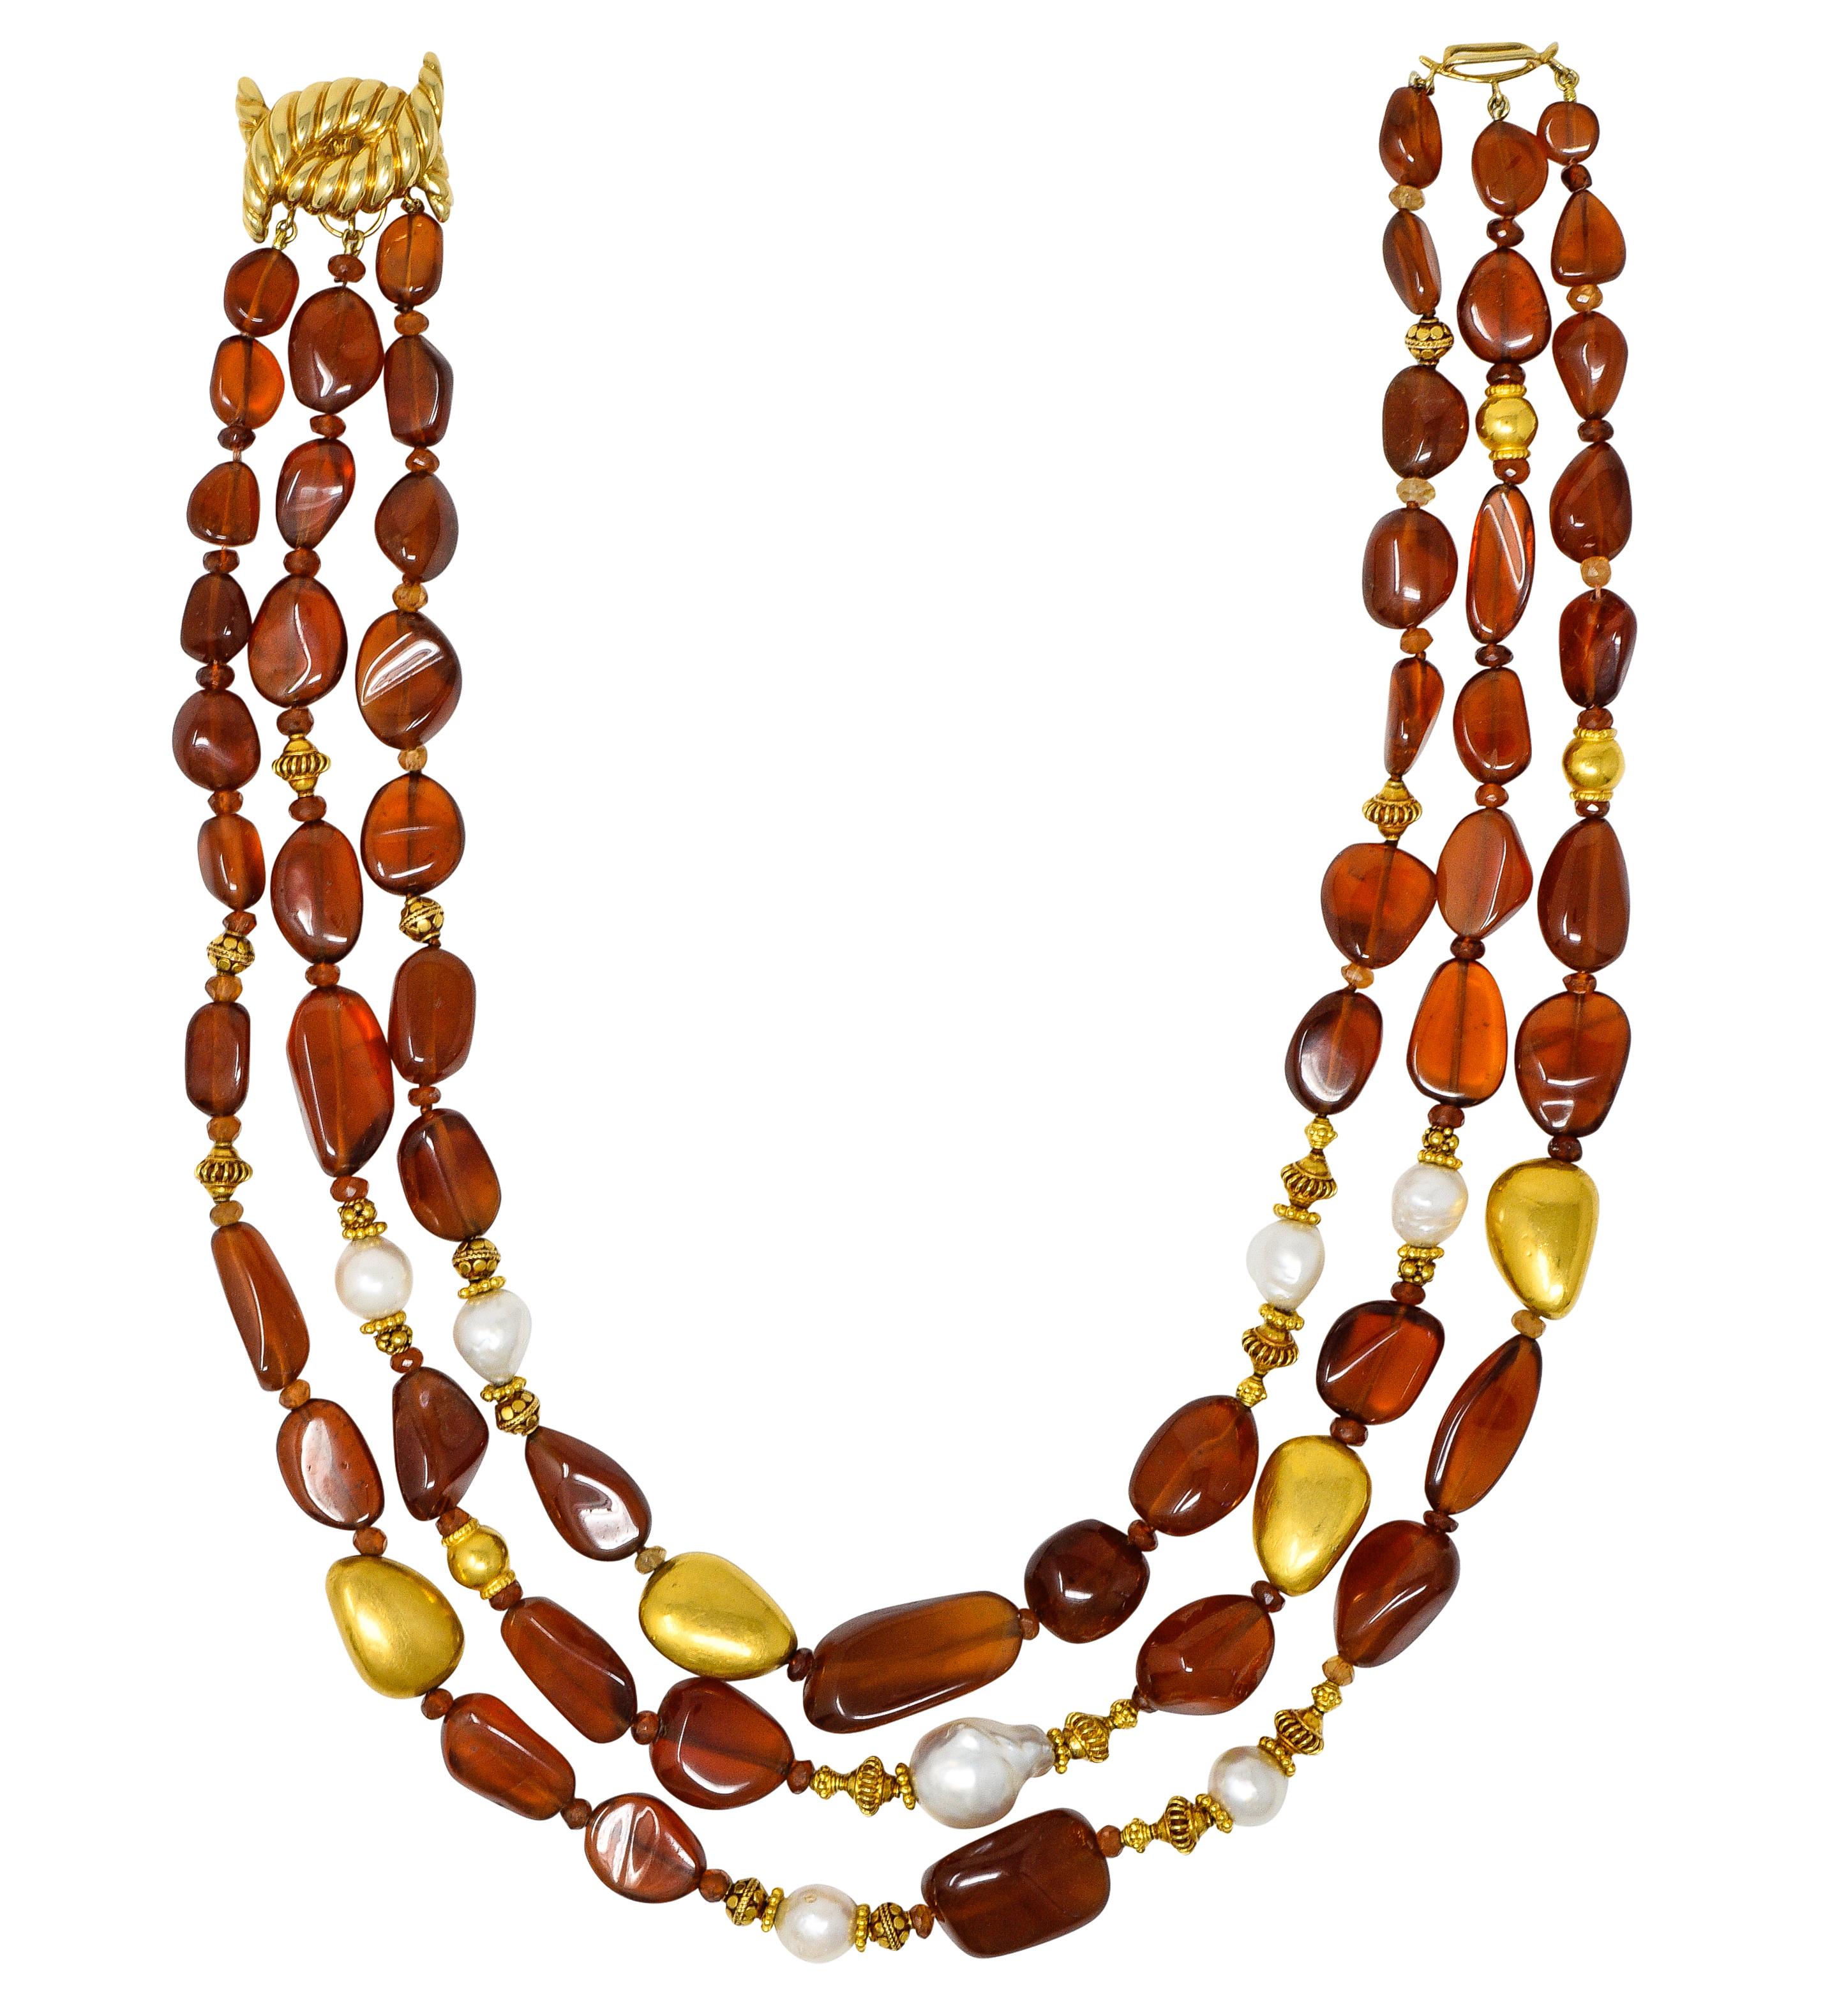 Multi-strand necklace is comprised primarily of tumbled hessonite garnet beads. Measuring from 27.5 x 14.5 mm to 7.0 x 7.5 mm and very well matched in saturation. With 4.0 mm rondelles of faceted hessonite garnet - varied in saturation. All are